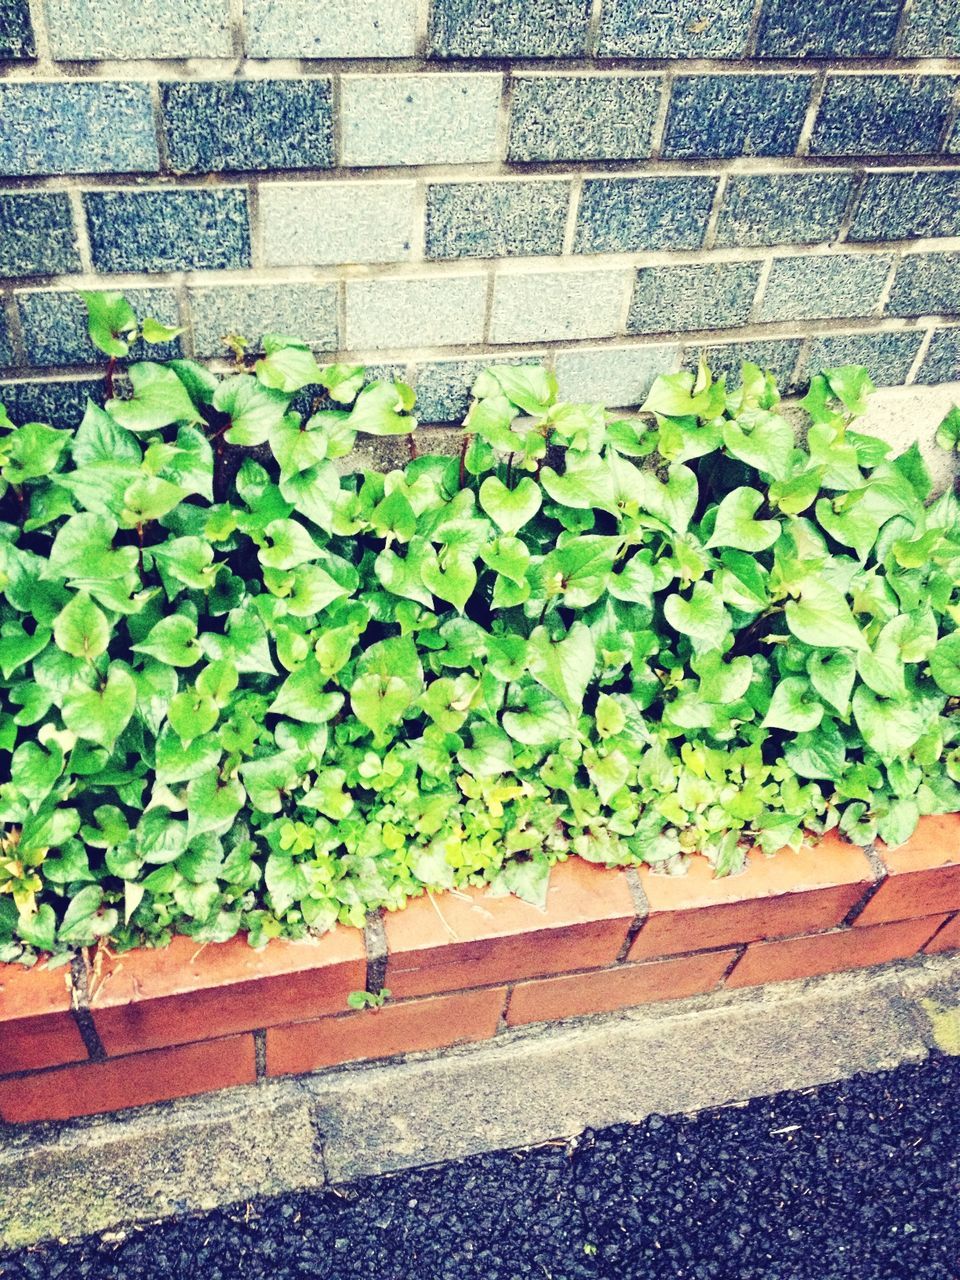 plant, growth, leaf, green color, high angle view, wall - building feature, potted plant, nature, growing, brick wall, ivy, day, outdoors, stone wall, built structure, steps, freshness, flower, no people, architecture